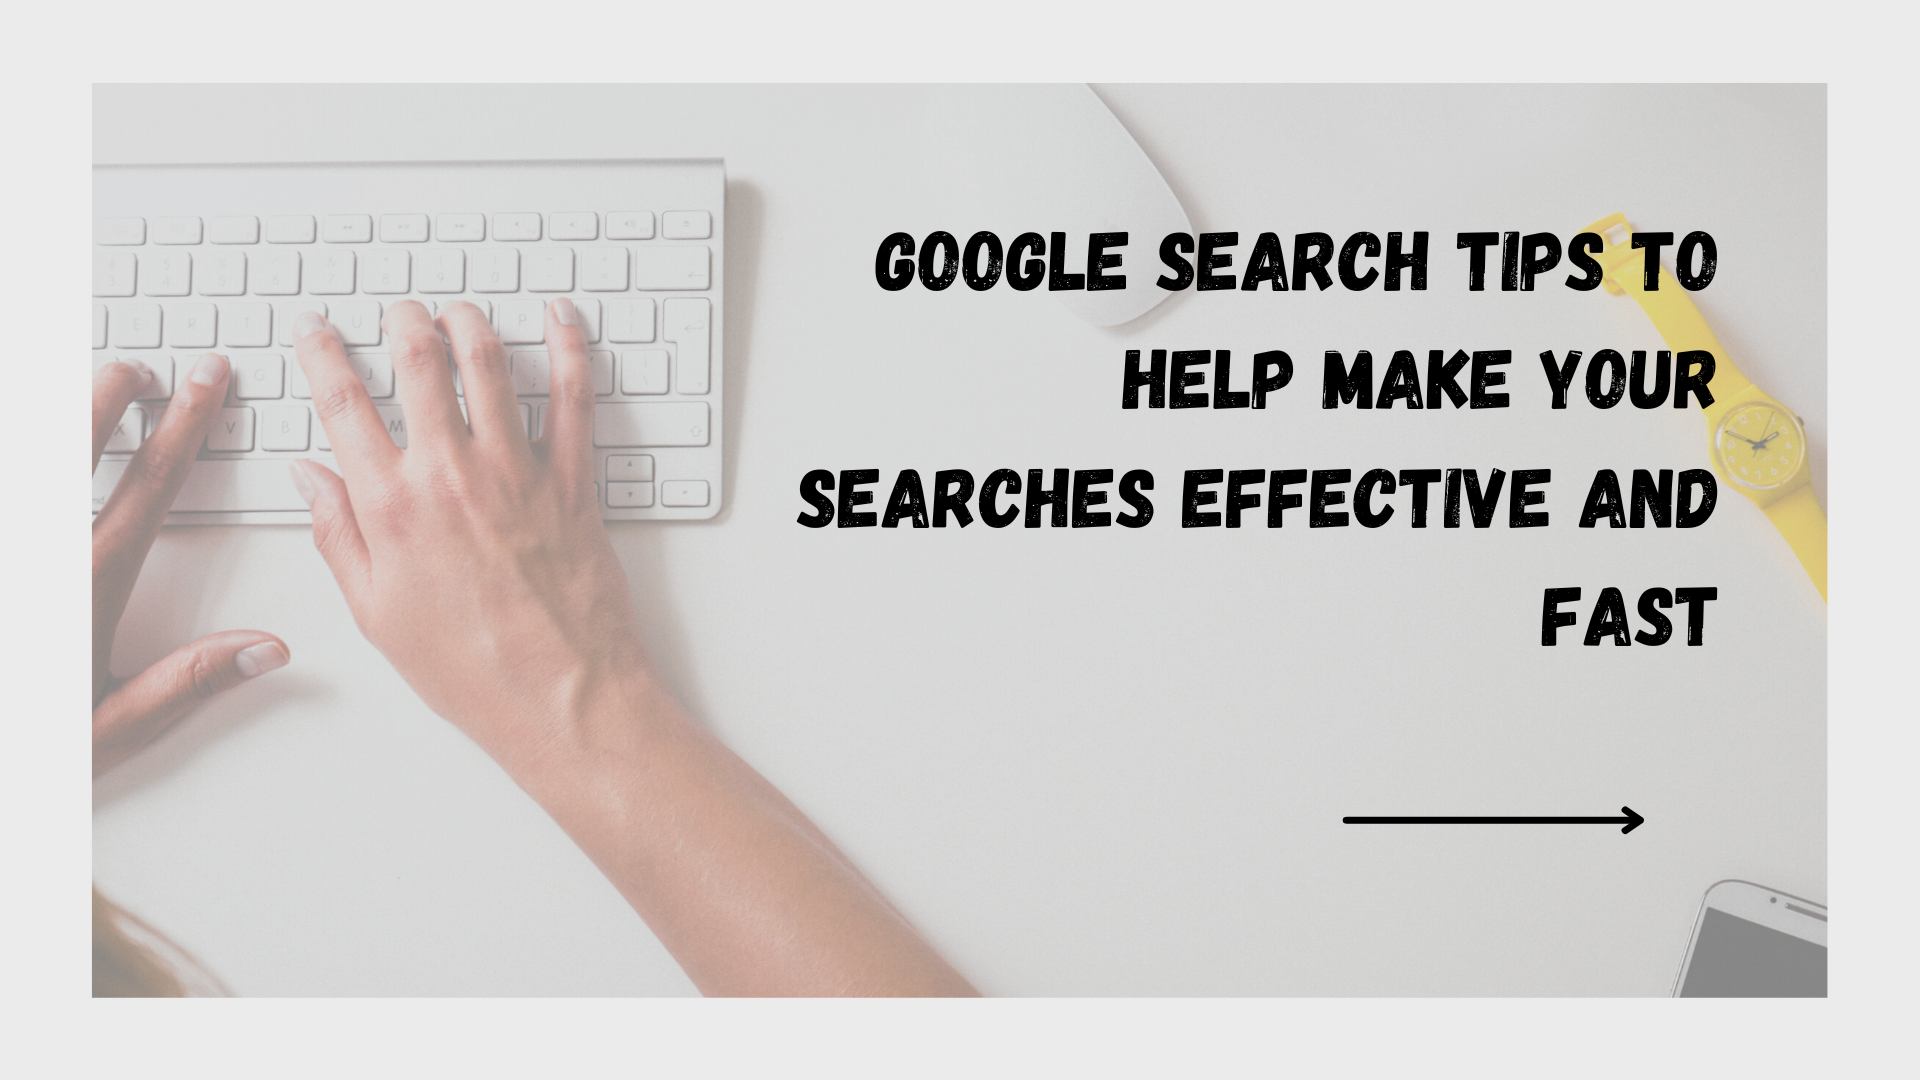 Google Search Tips To Help Make Your Searches Effective And Fast